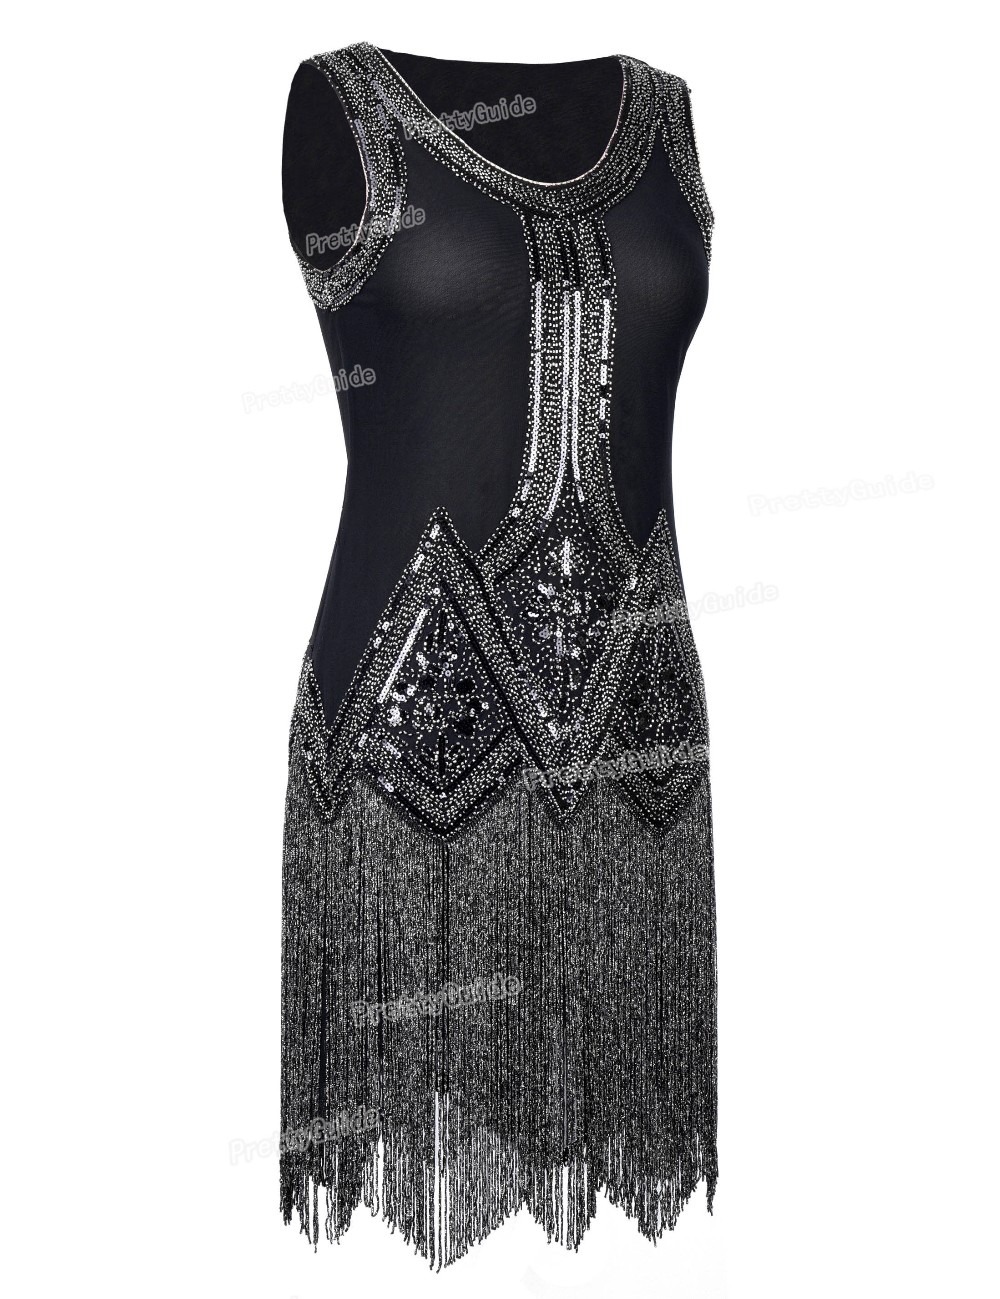 PrettyGuide-Women39s-1920s-Vintage-Beaded-Fringed-Inspired-Black-Flapper-Dress-Great-gatsby-Party-Dr-32706632612